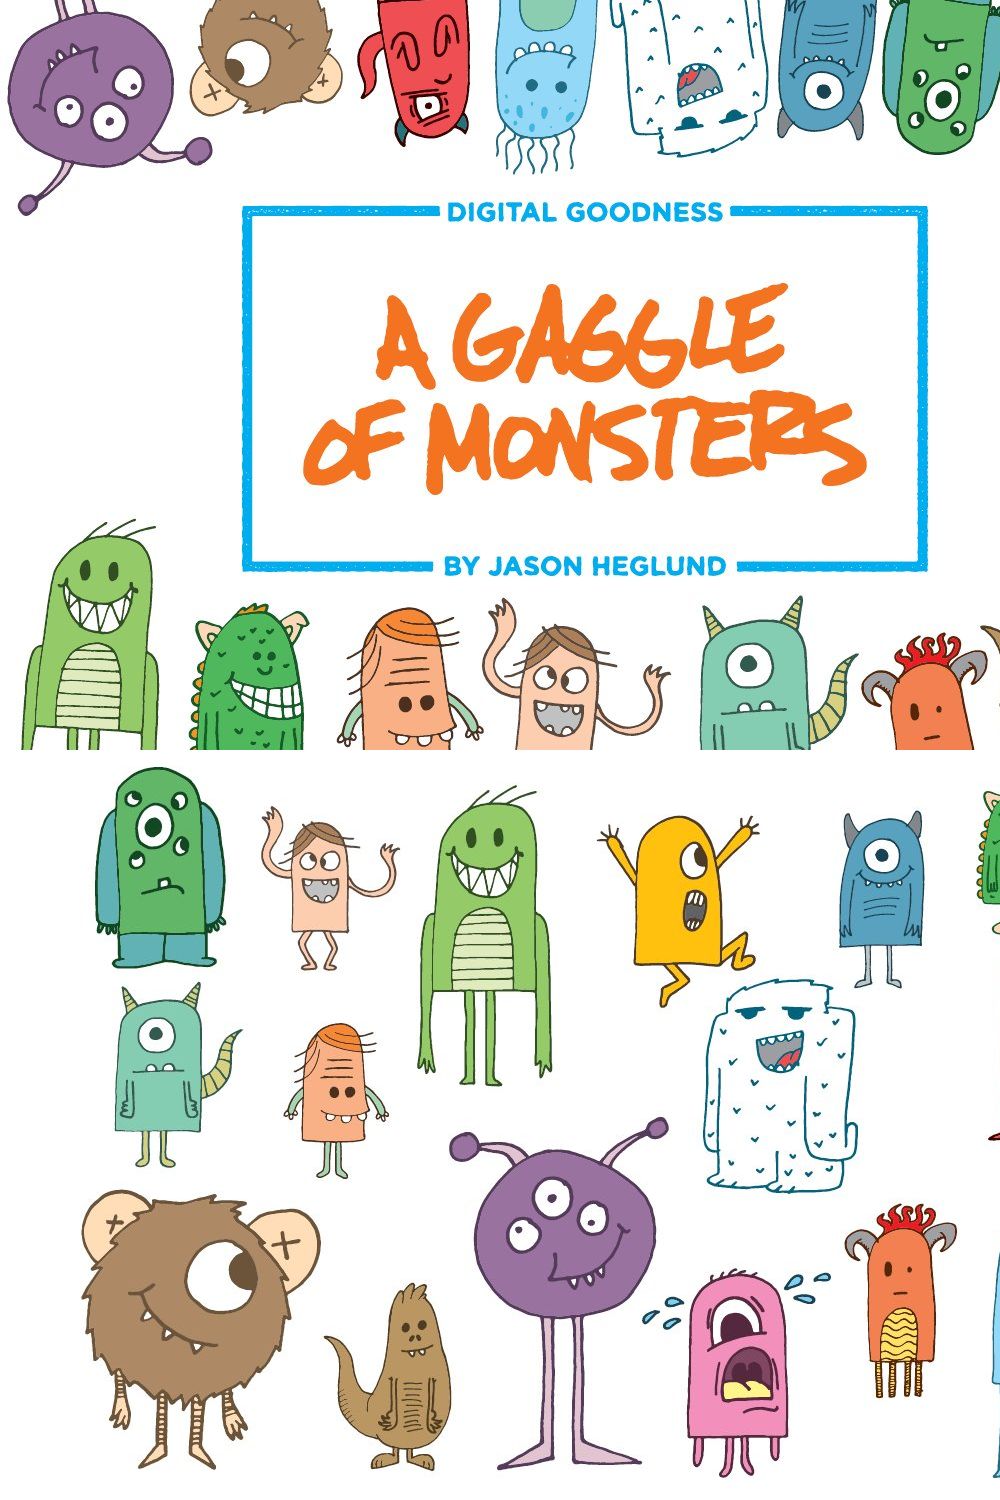 A Gaggle of Monsters pinterest preview image.